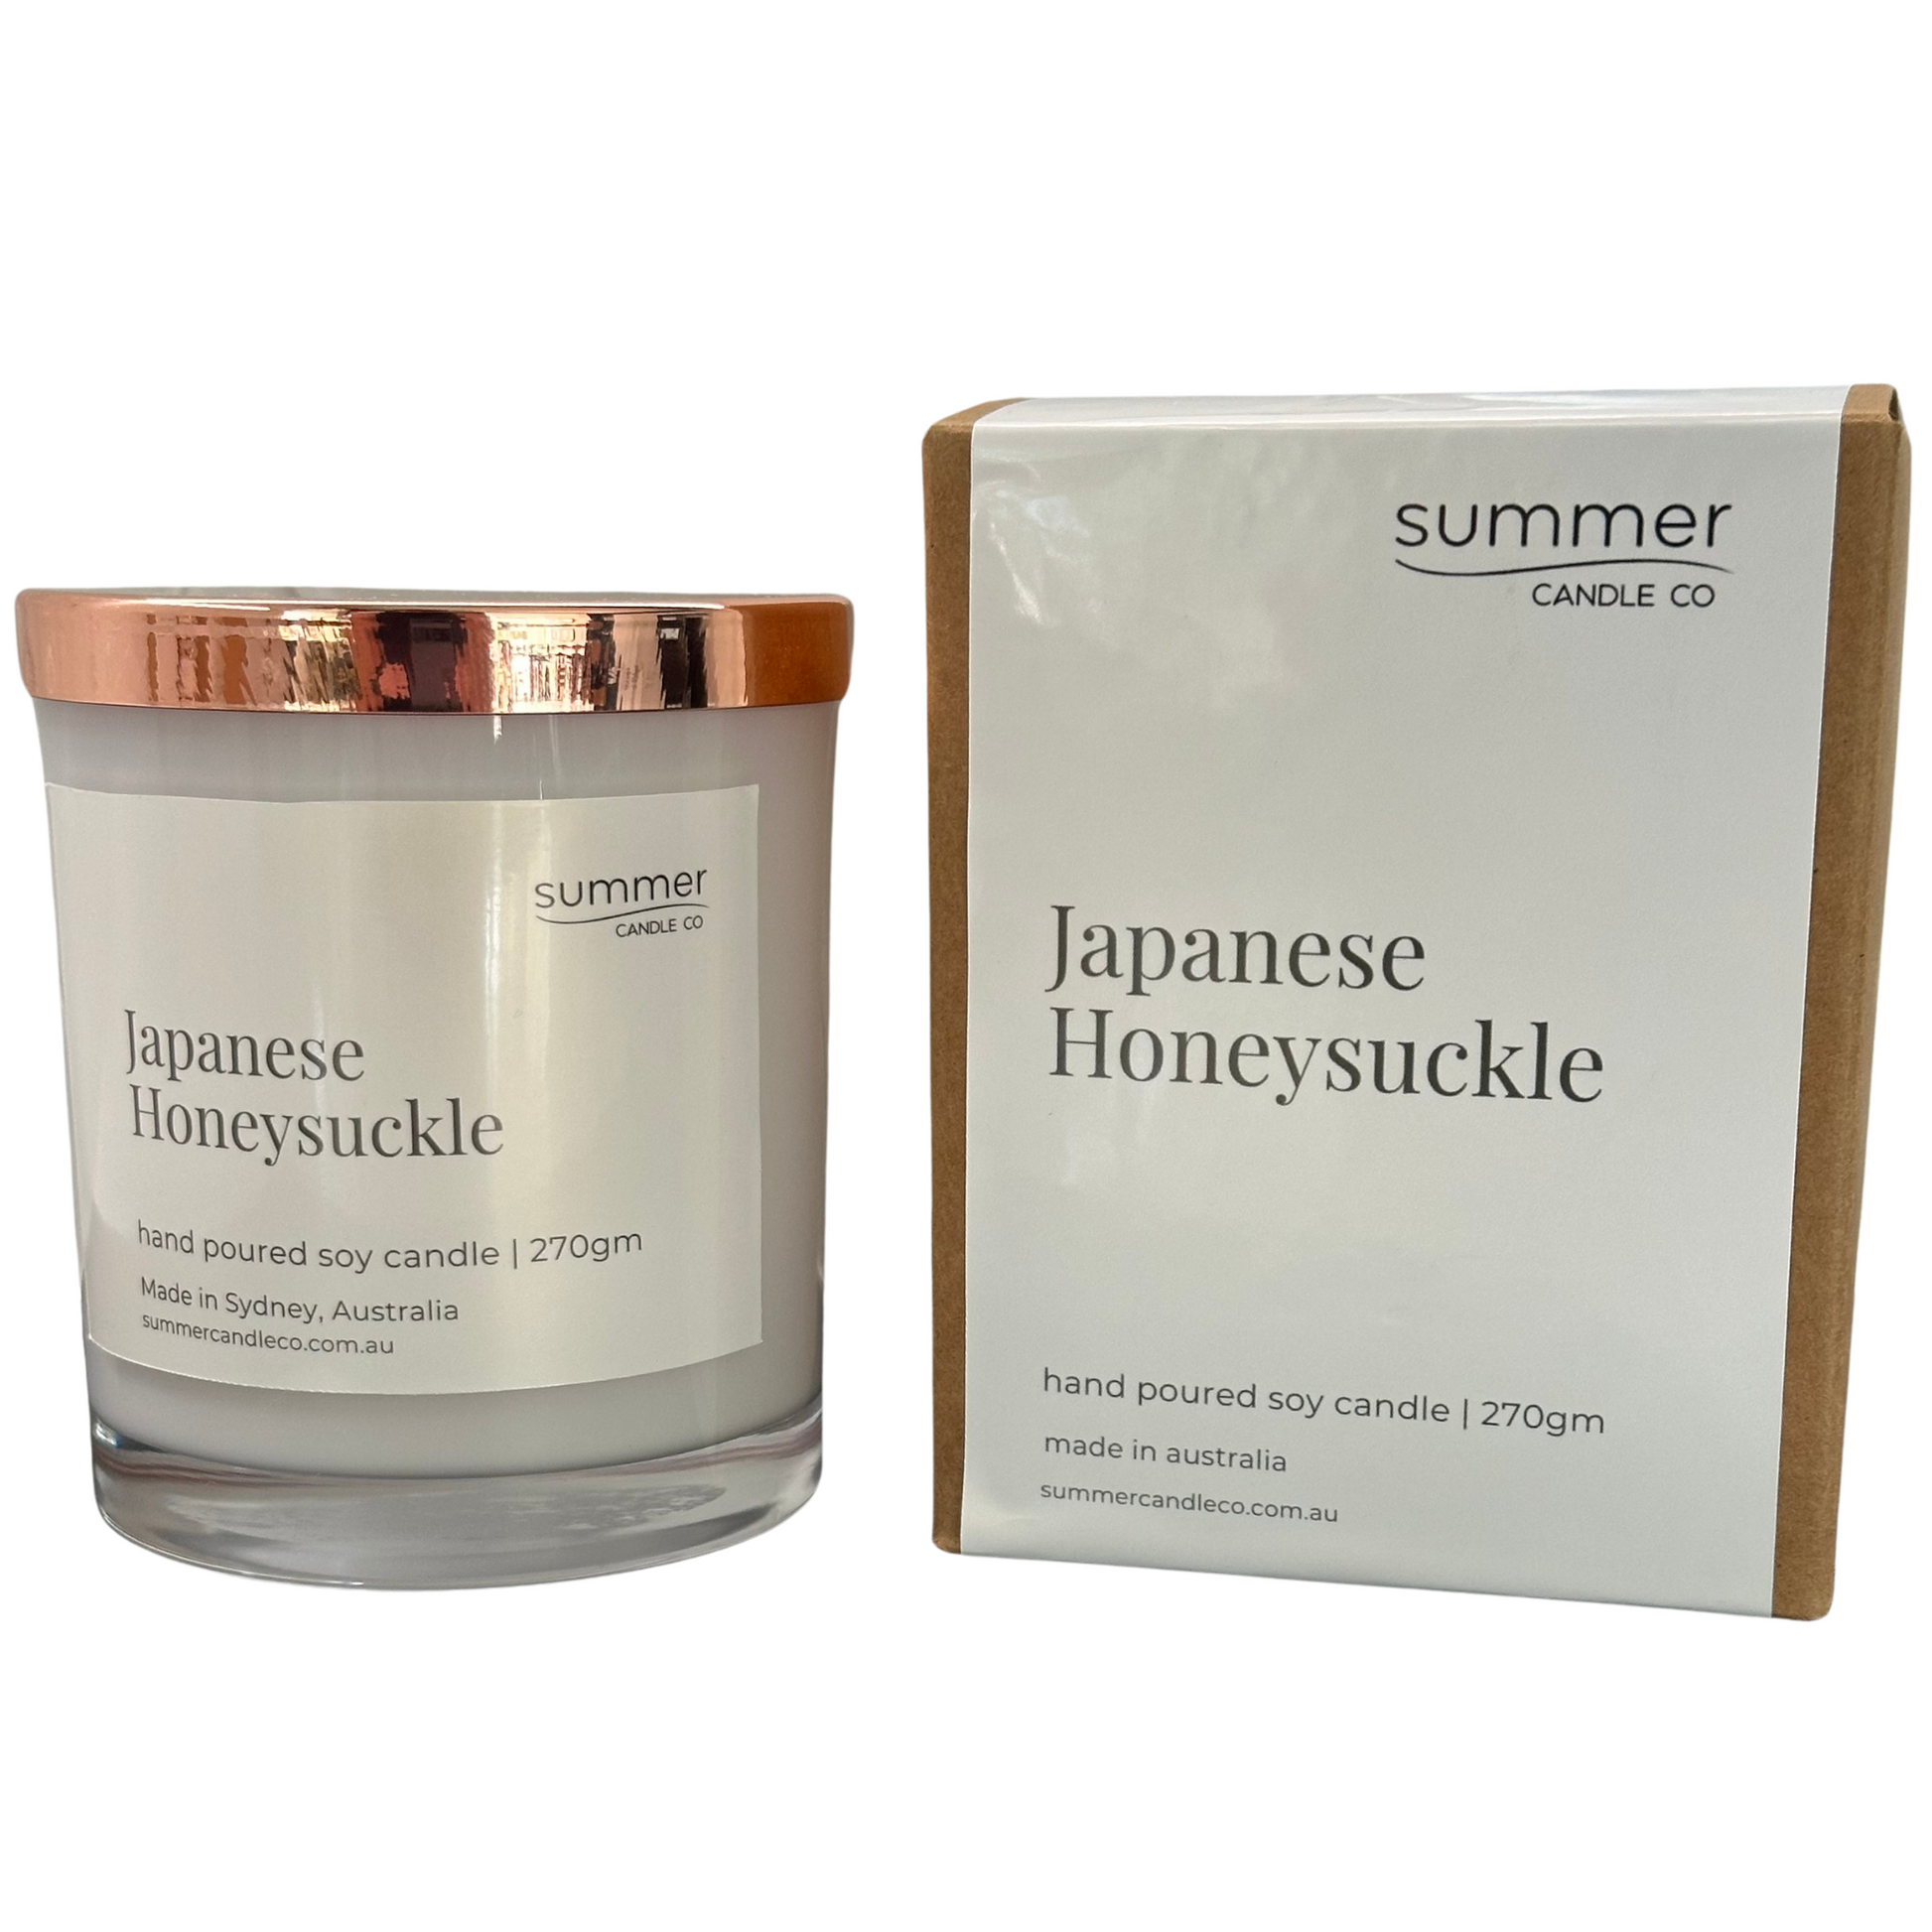 Lovely Hand Poured Soy Candle 270gram Fragrance of Japanese Honeysuckle with Gift Box